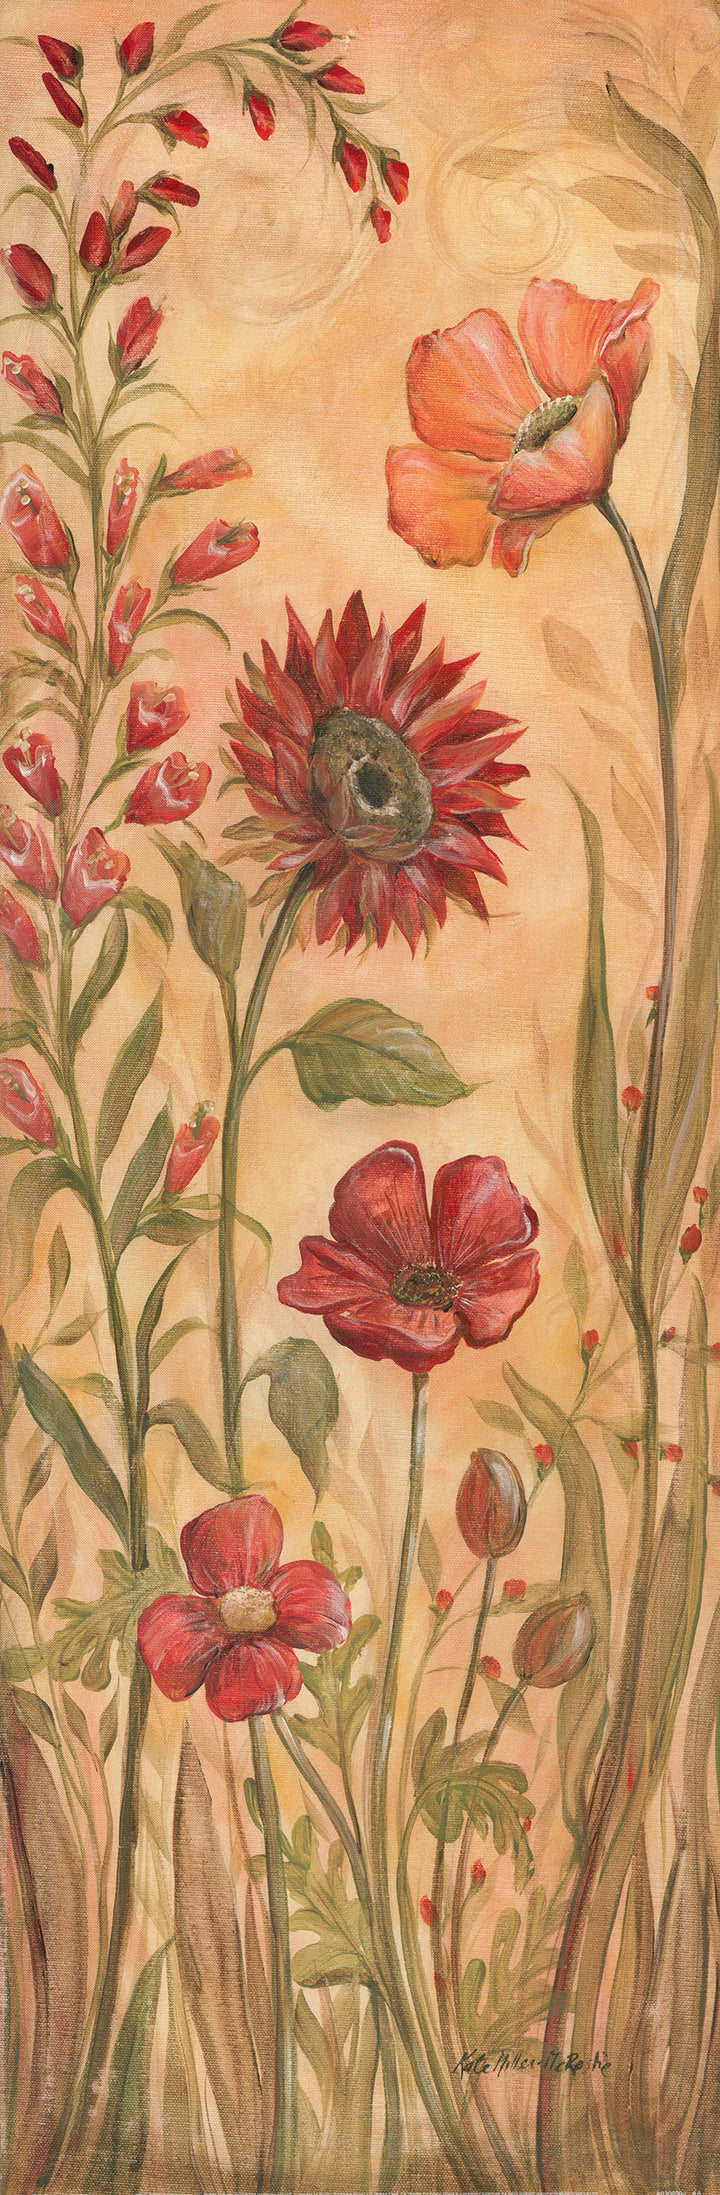 Floral Tapestry I by Kate McRostie - 12 X 36 Inches (Art Print)